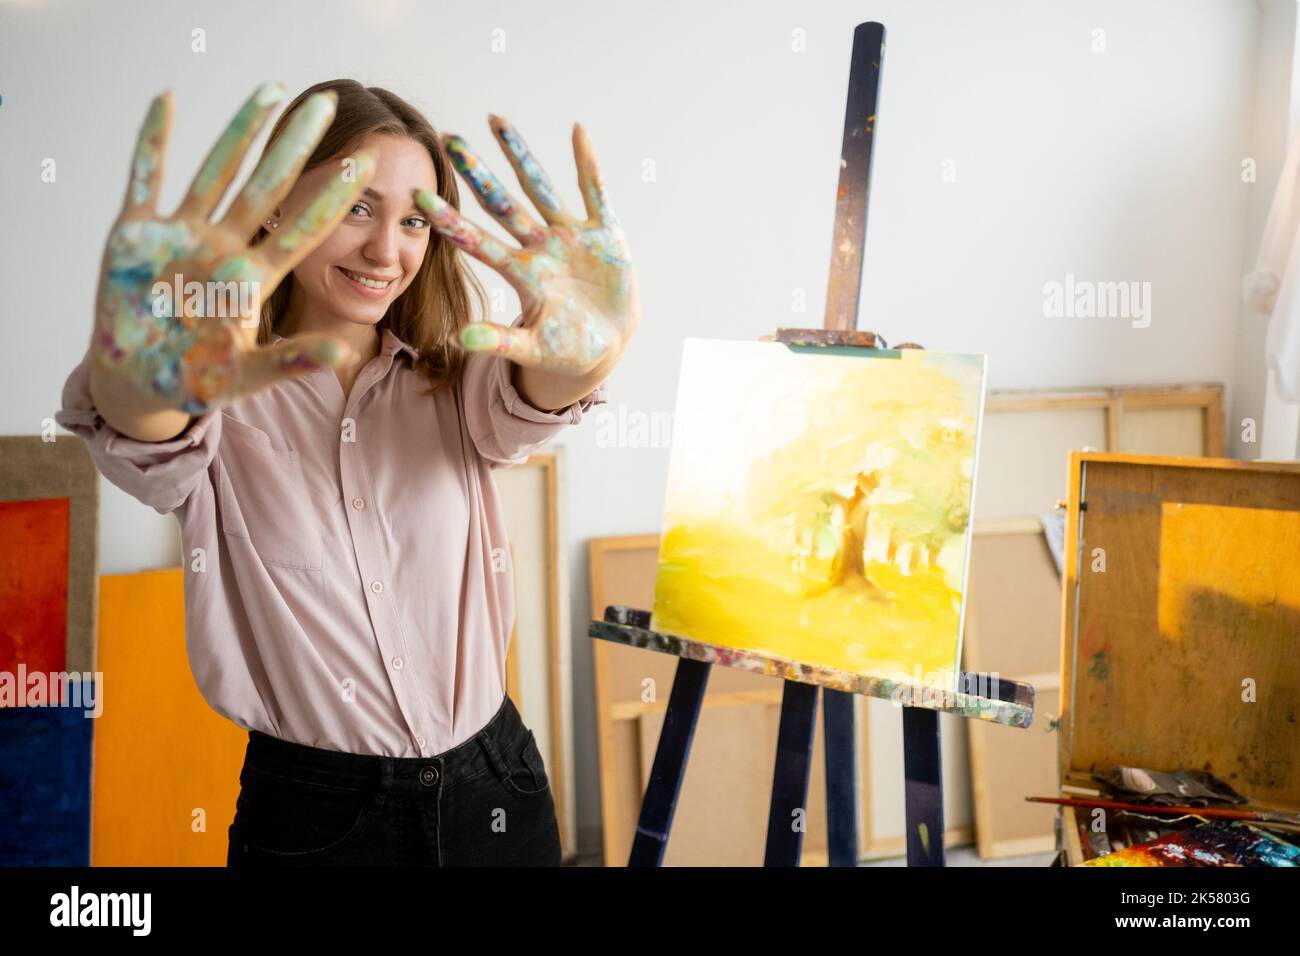 creative hobby hand painting happy artist picture Stock Photo